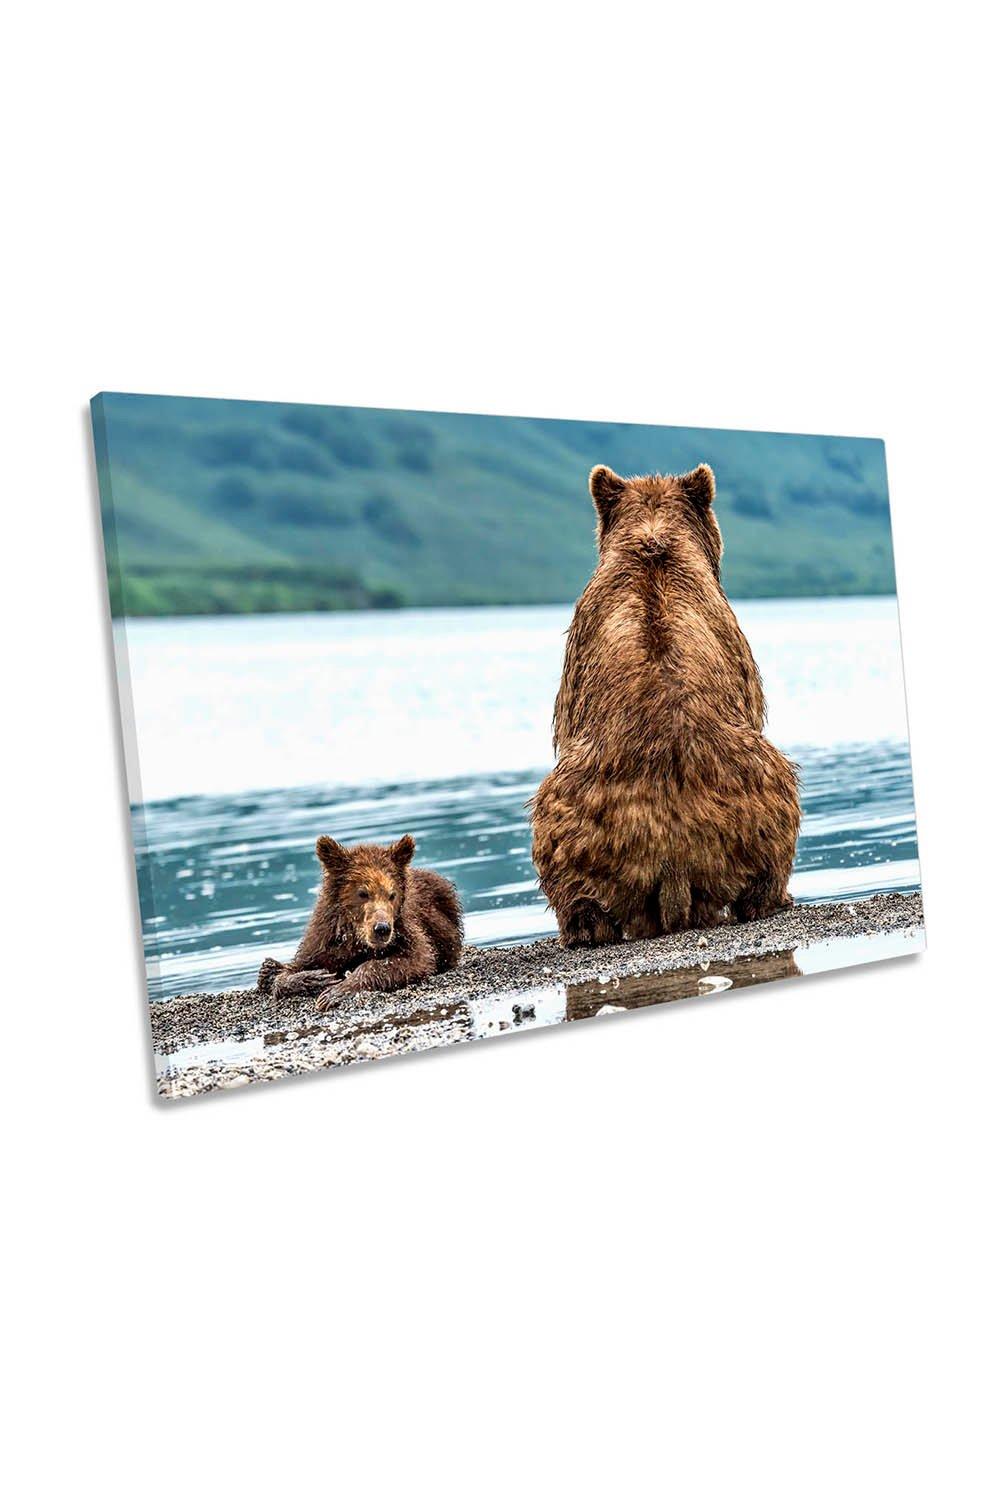 Opposites Brown Bears Family Canvas Wall Art Picture Print